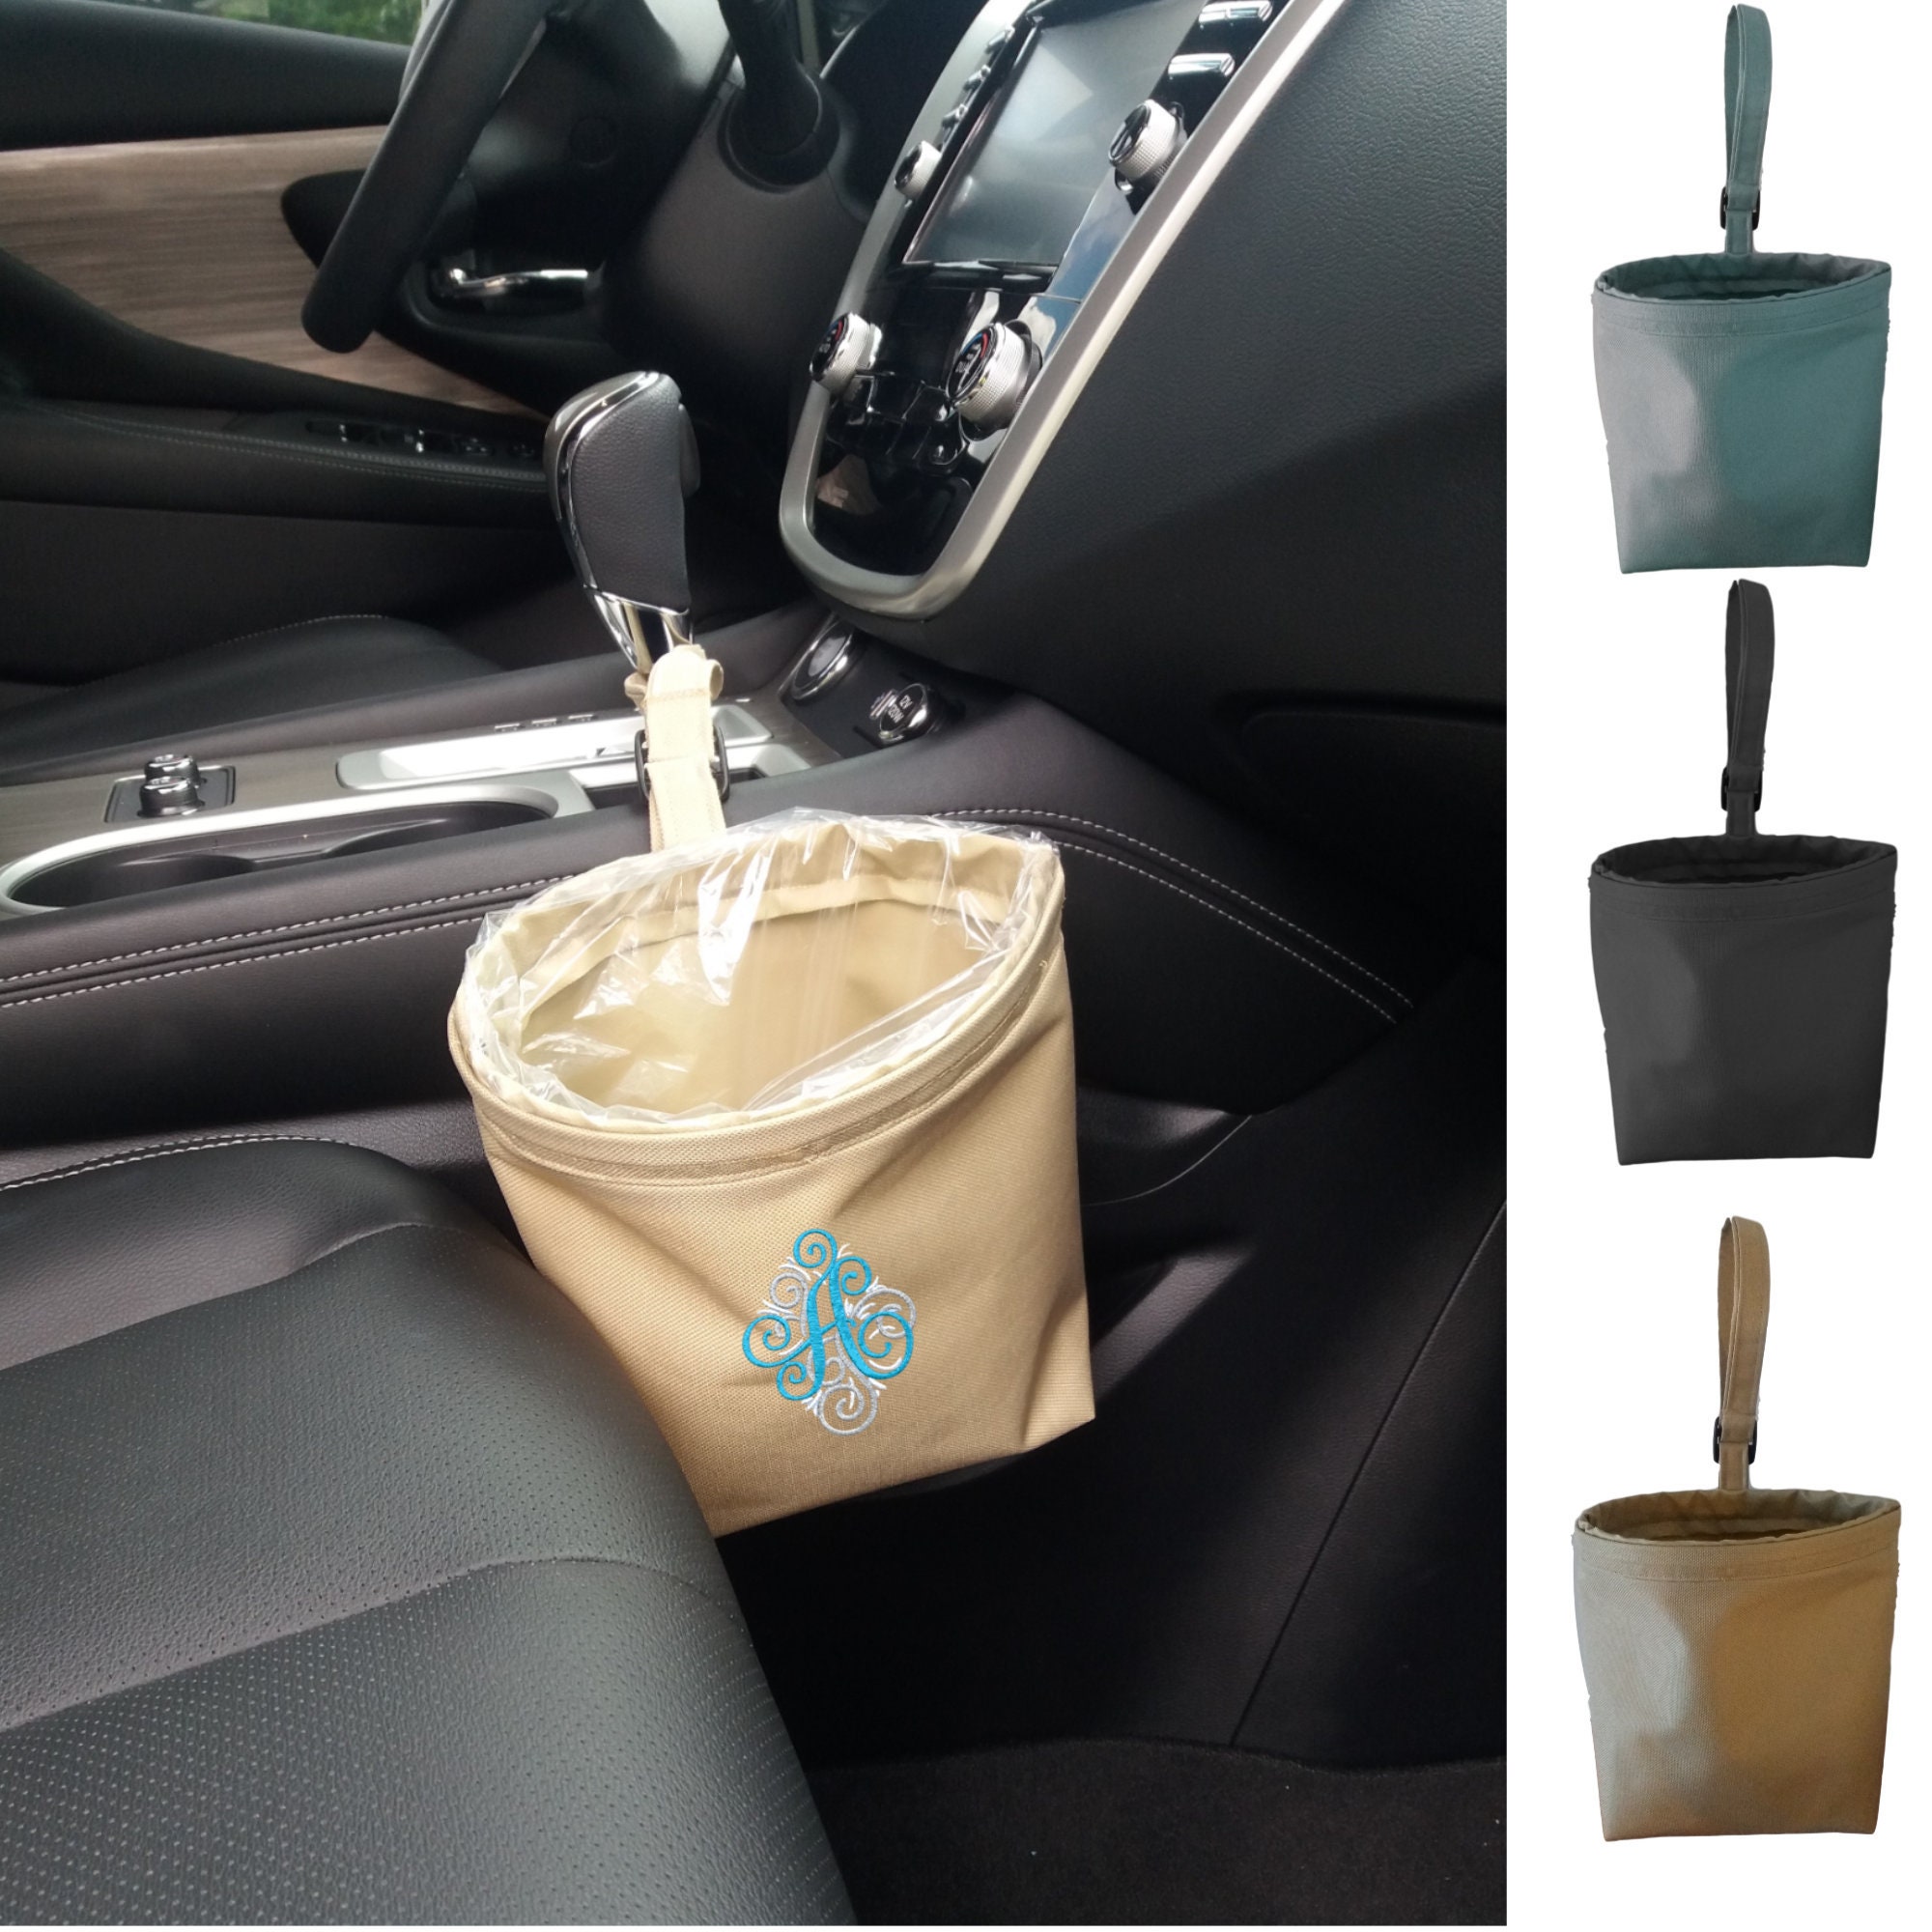 Car Trash Bag, Automobile Litter Bag Can Be Personalized With